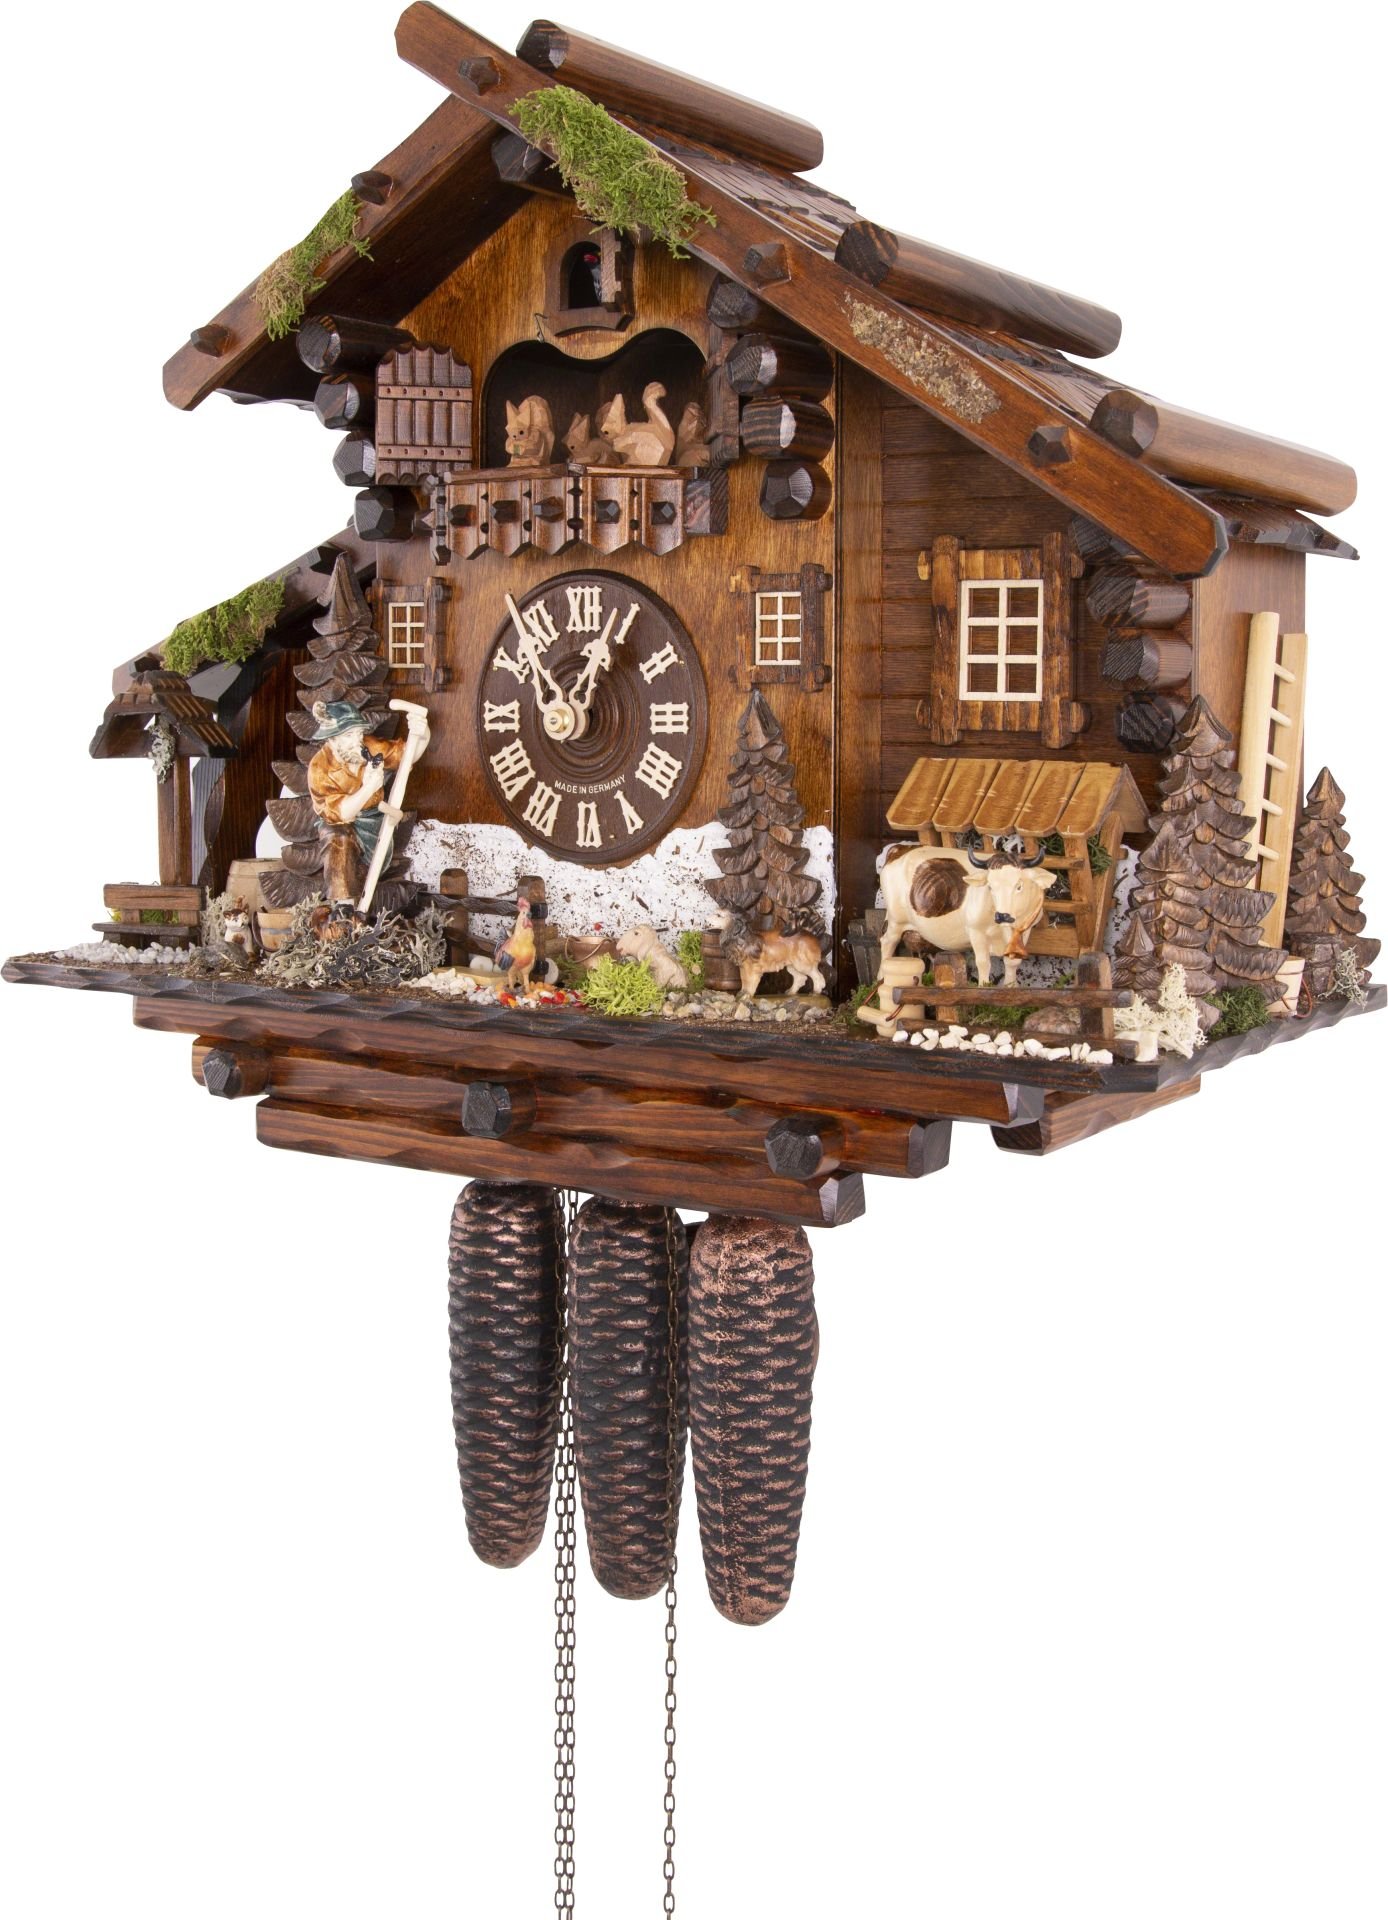 Cuckoo Clock Chalet Style 8 Day Movement 35cm by August Schwer